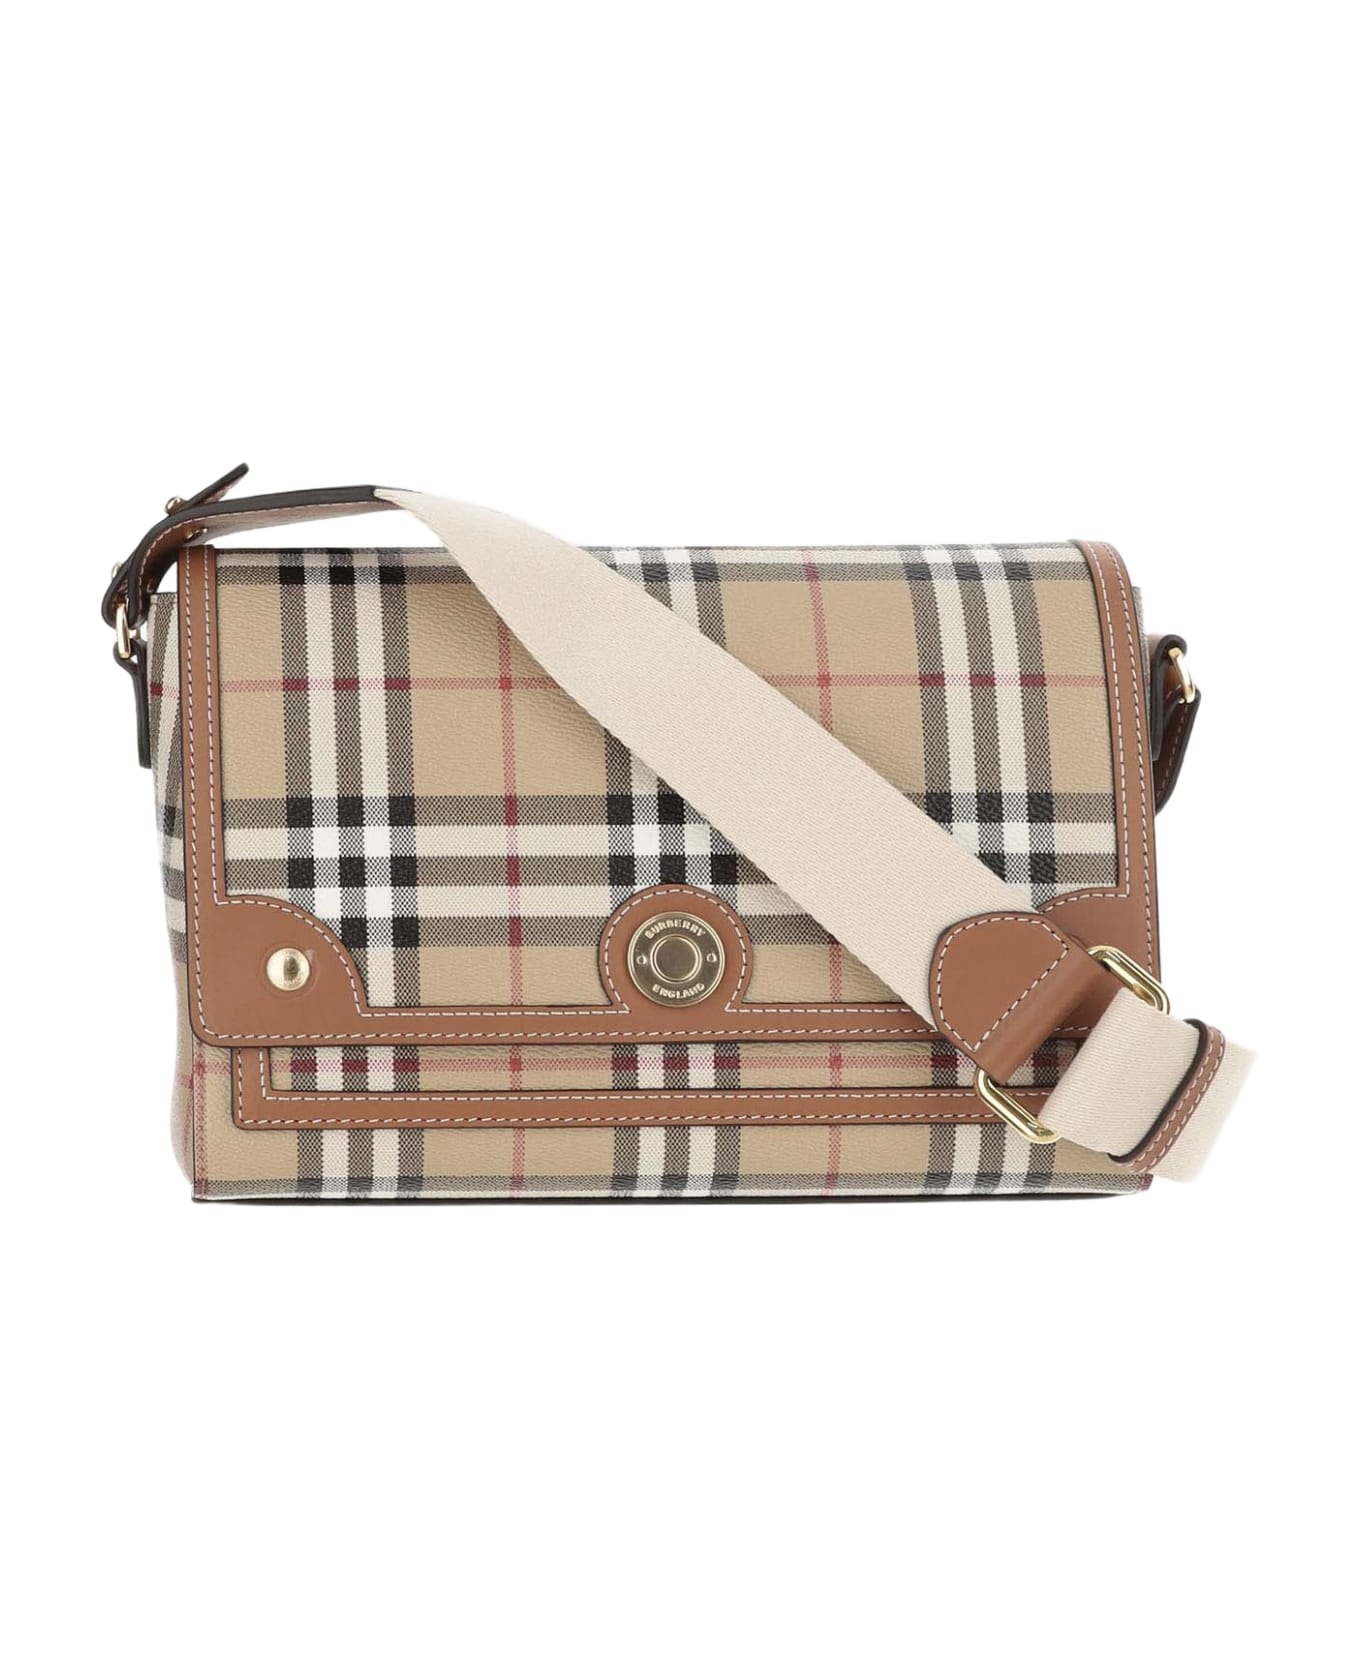 Burberry Bag With Check Pattern - Red